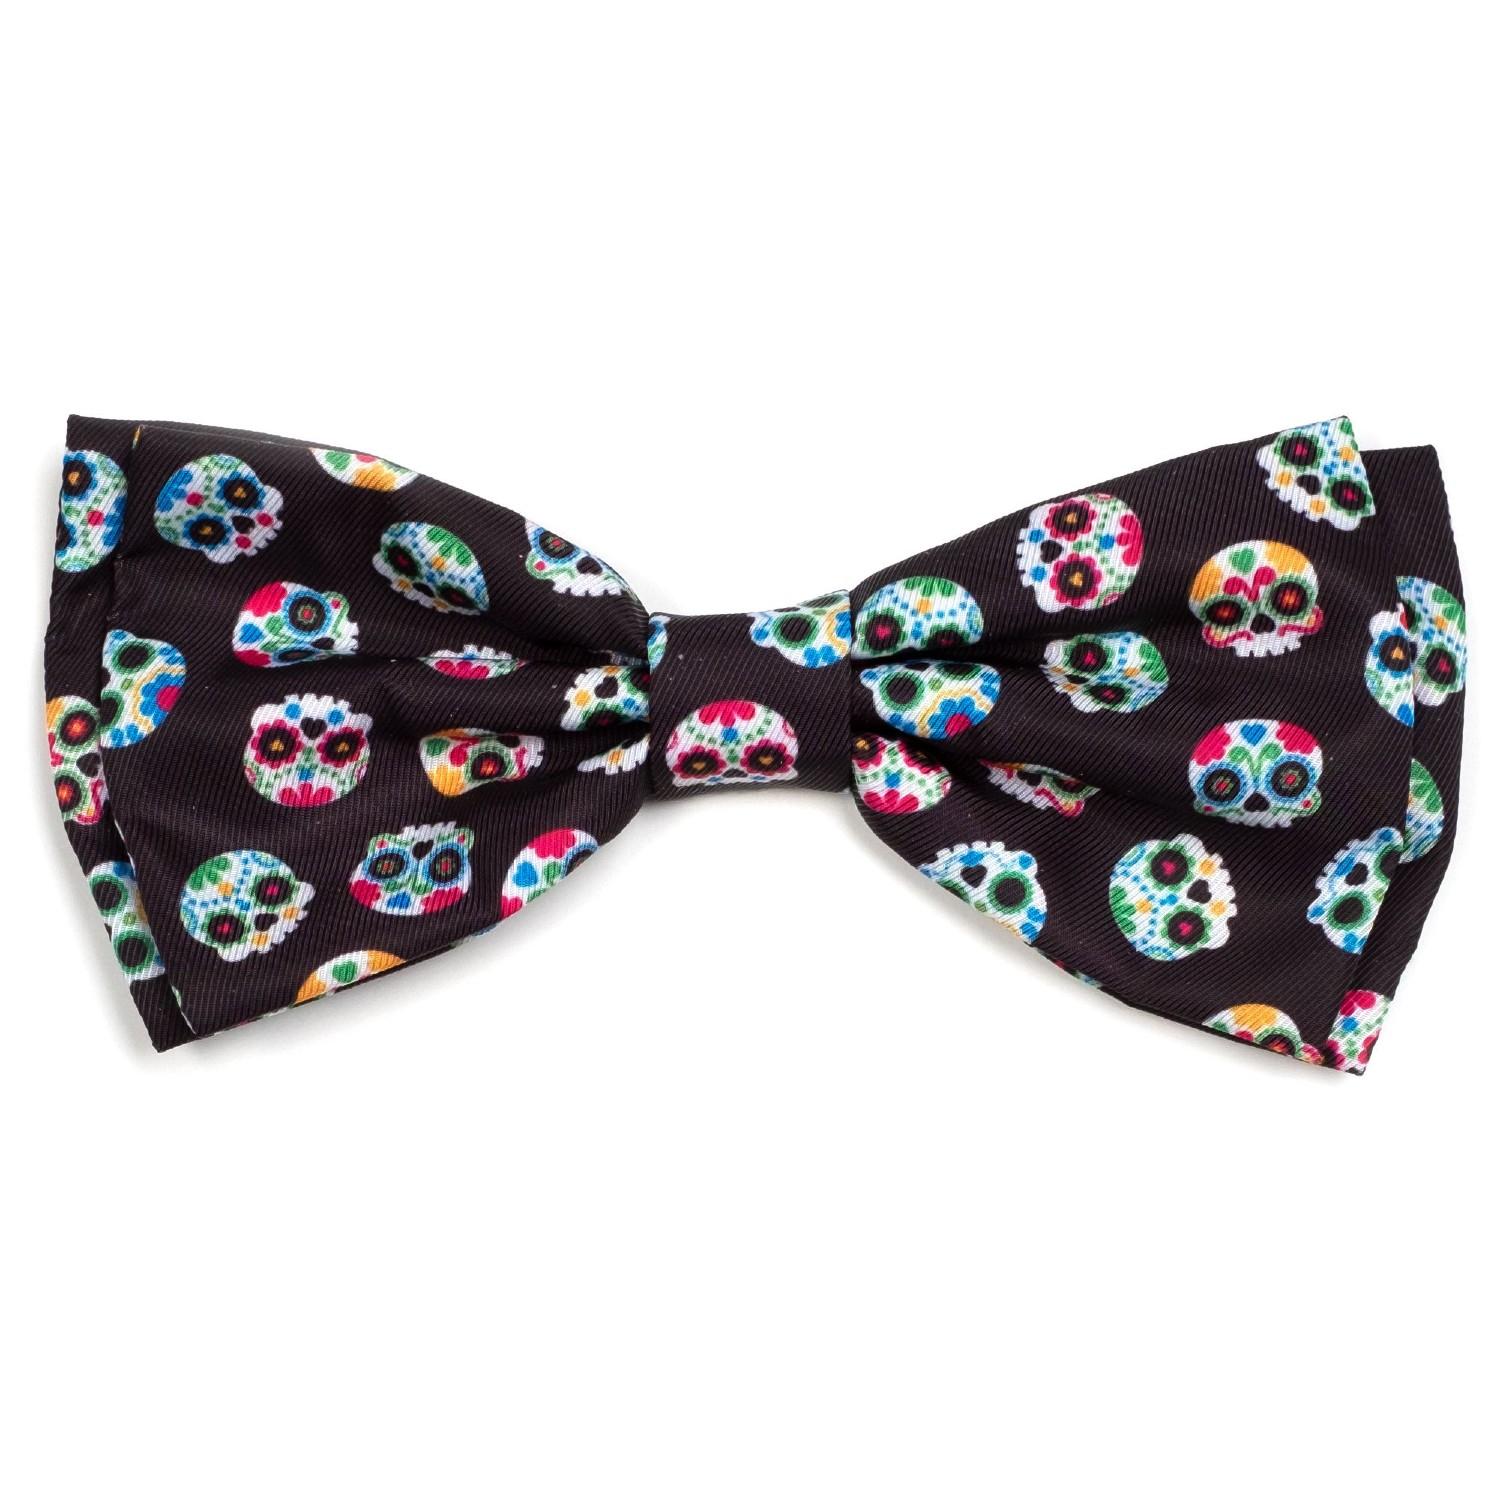 Worthy Dog Halloween Dog and Cat Bow Tie Collar Attachment - Skeletons Black